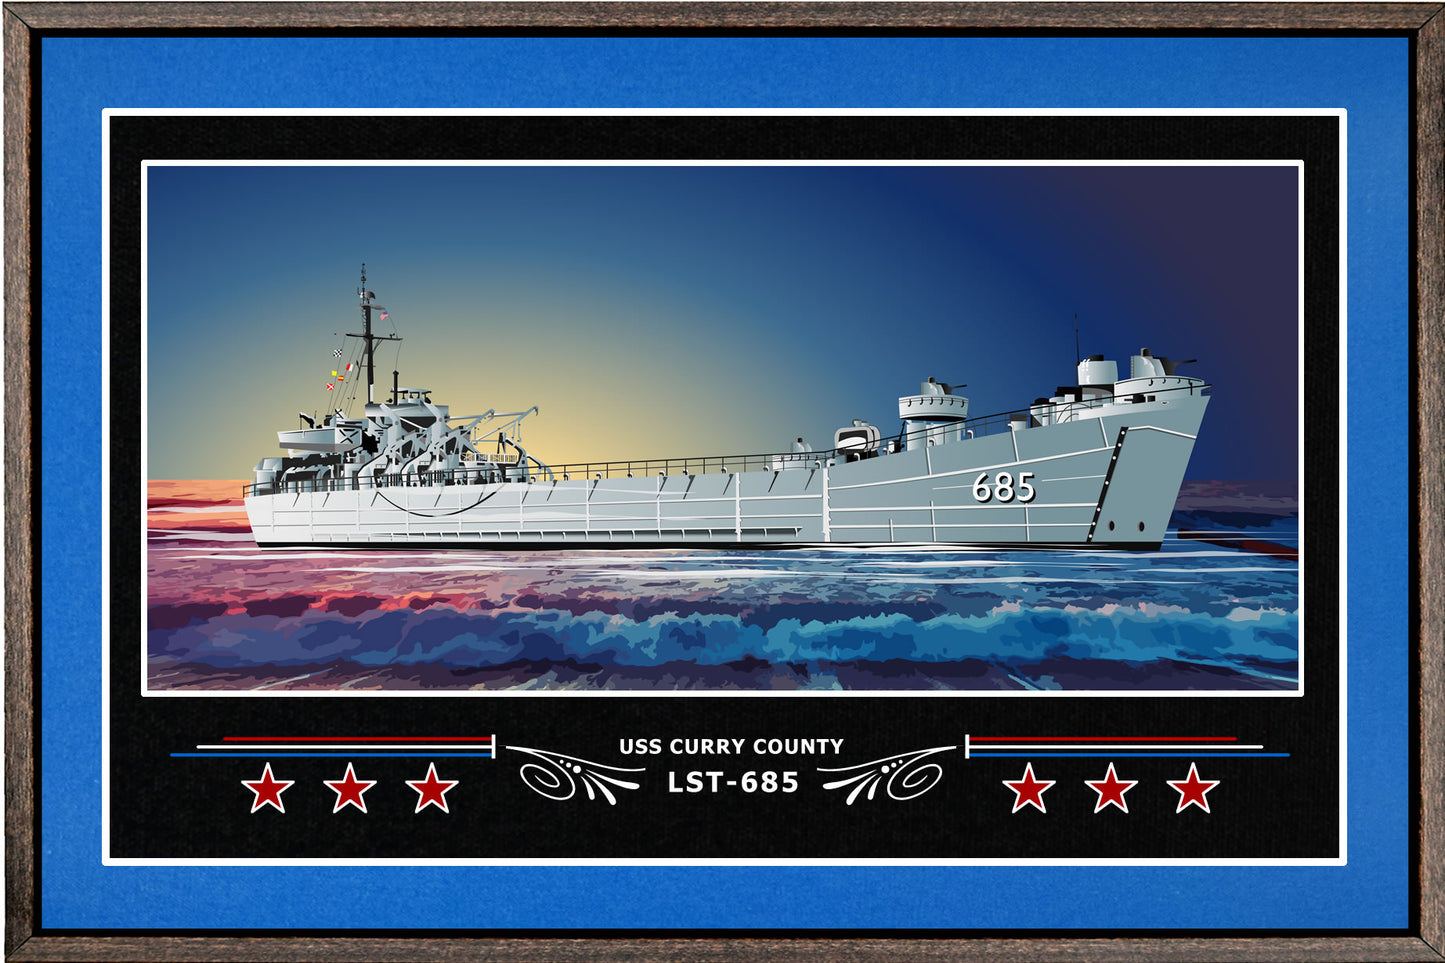 USS CURRY COUNTY LST 685 BOX FRAMED CANVAS ART BLUE